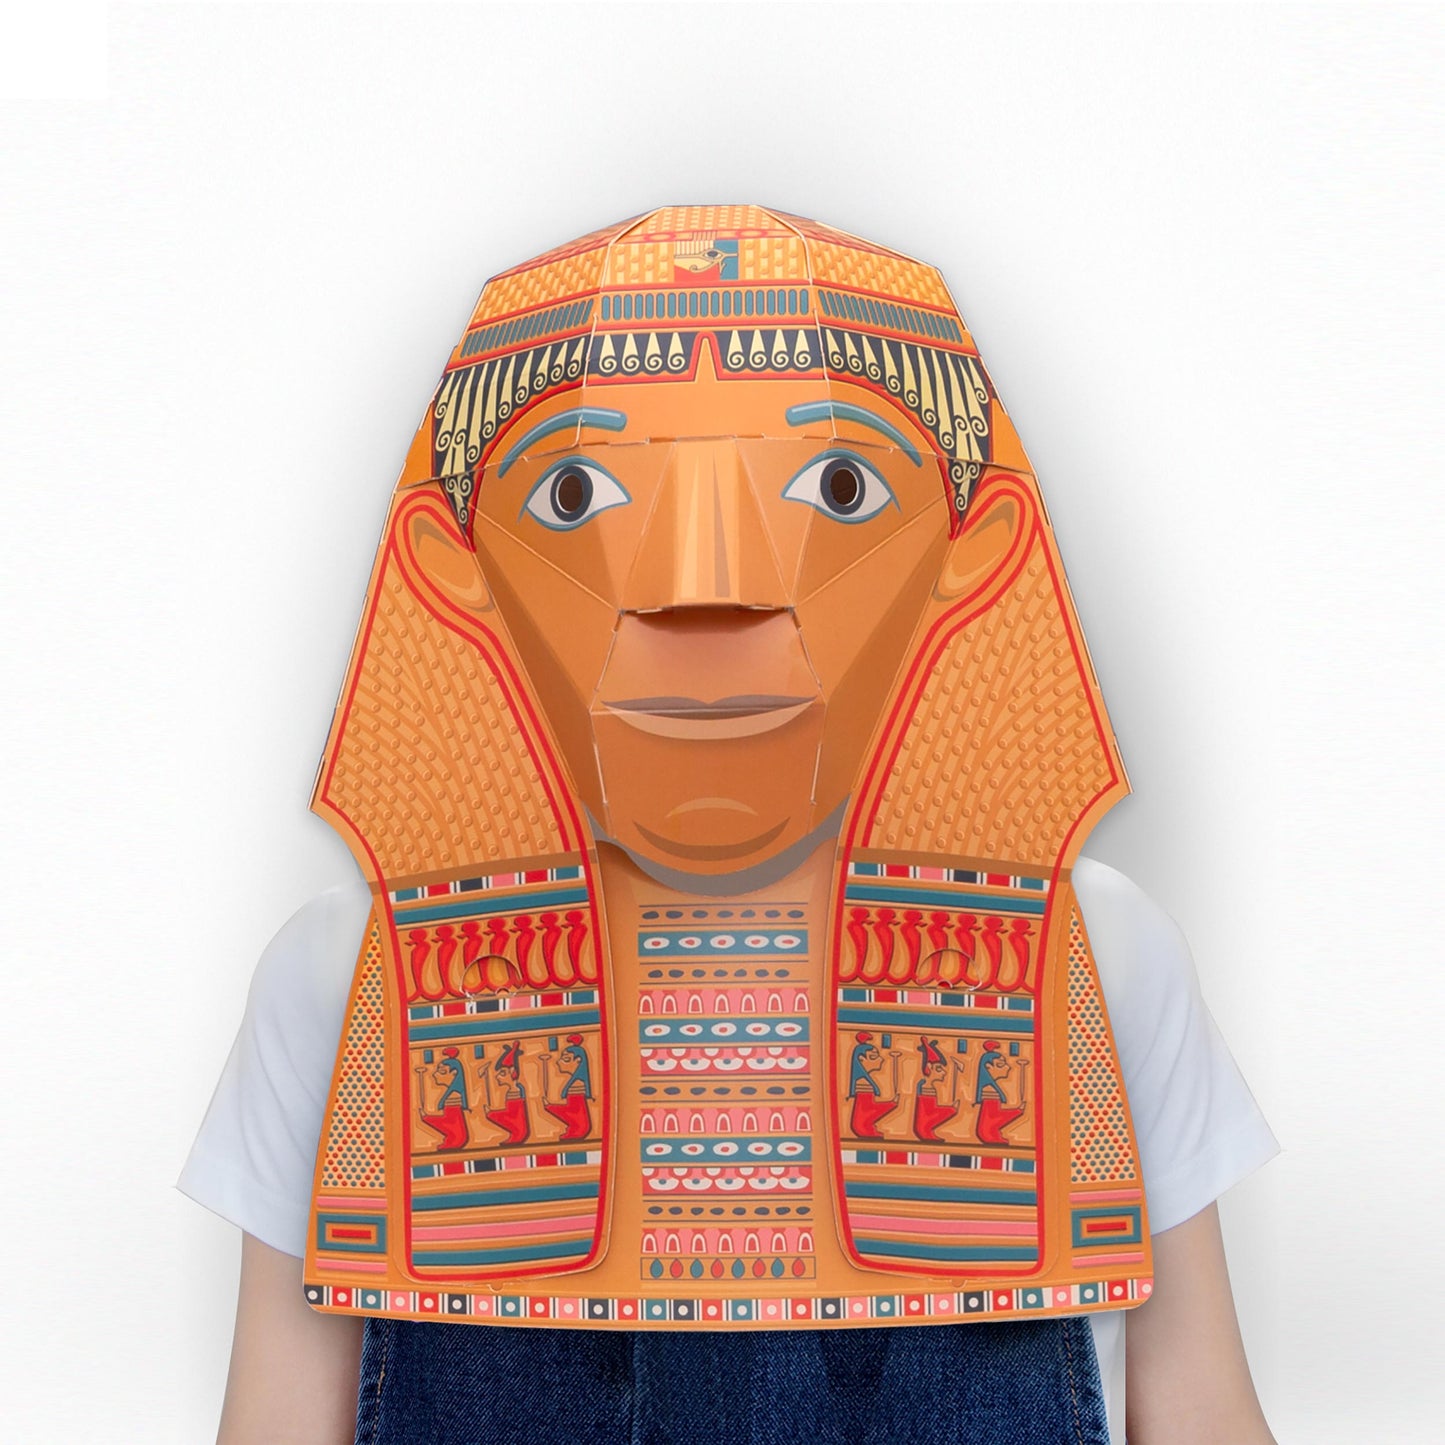 The assembled headmask shown worn by a child, only the shoulders and arms are visible under the mask.